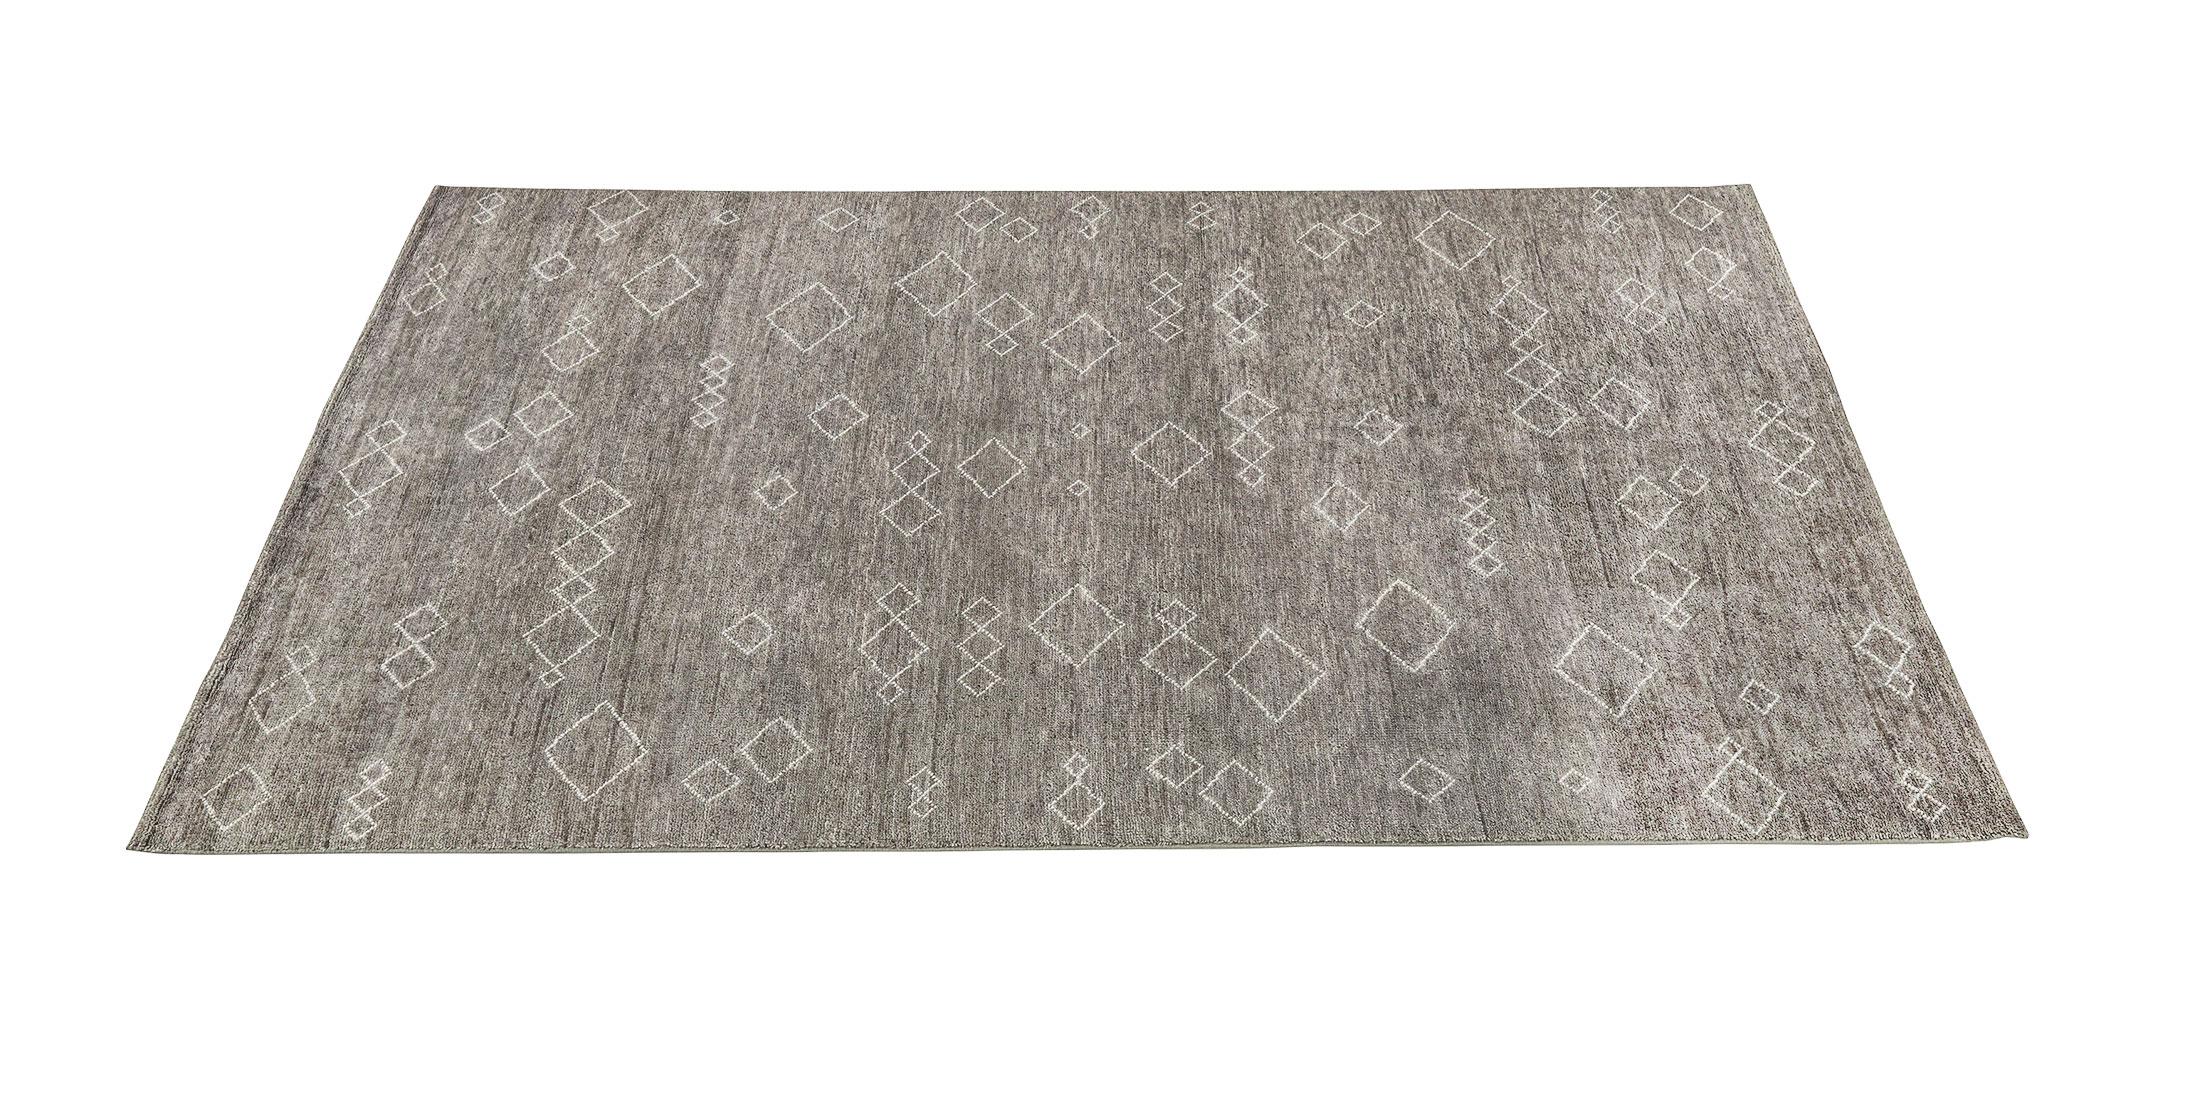 For Sale: Gray (Graphite/Sand) Ben Soleimani Arisa Rug– Moroccan Hand-knotted Plush Wool Carbon/Mist 9'x12' 2